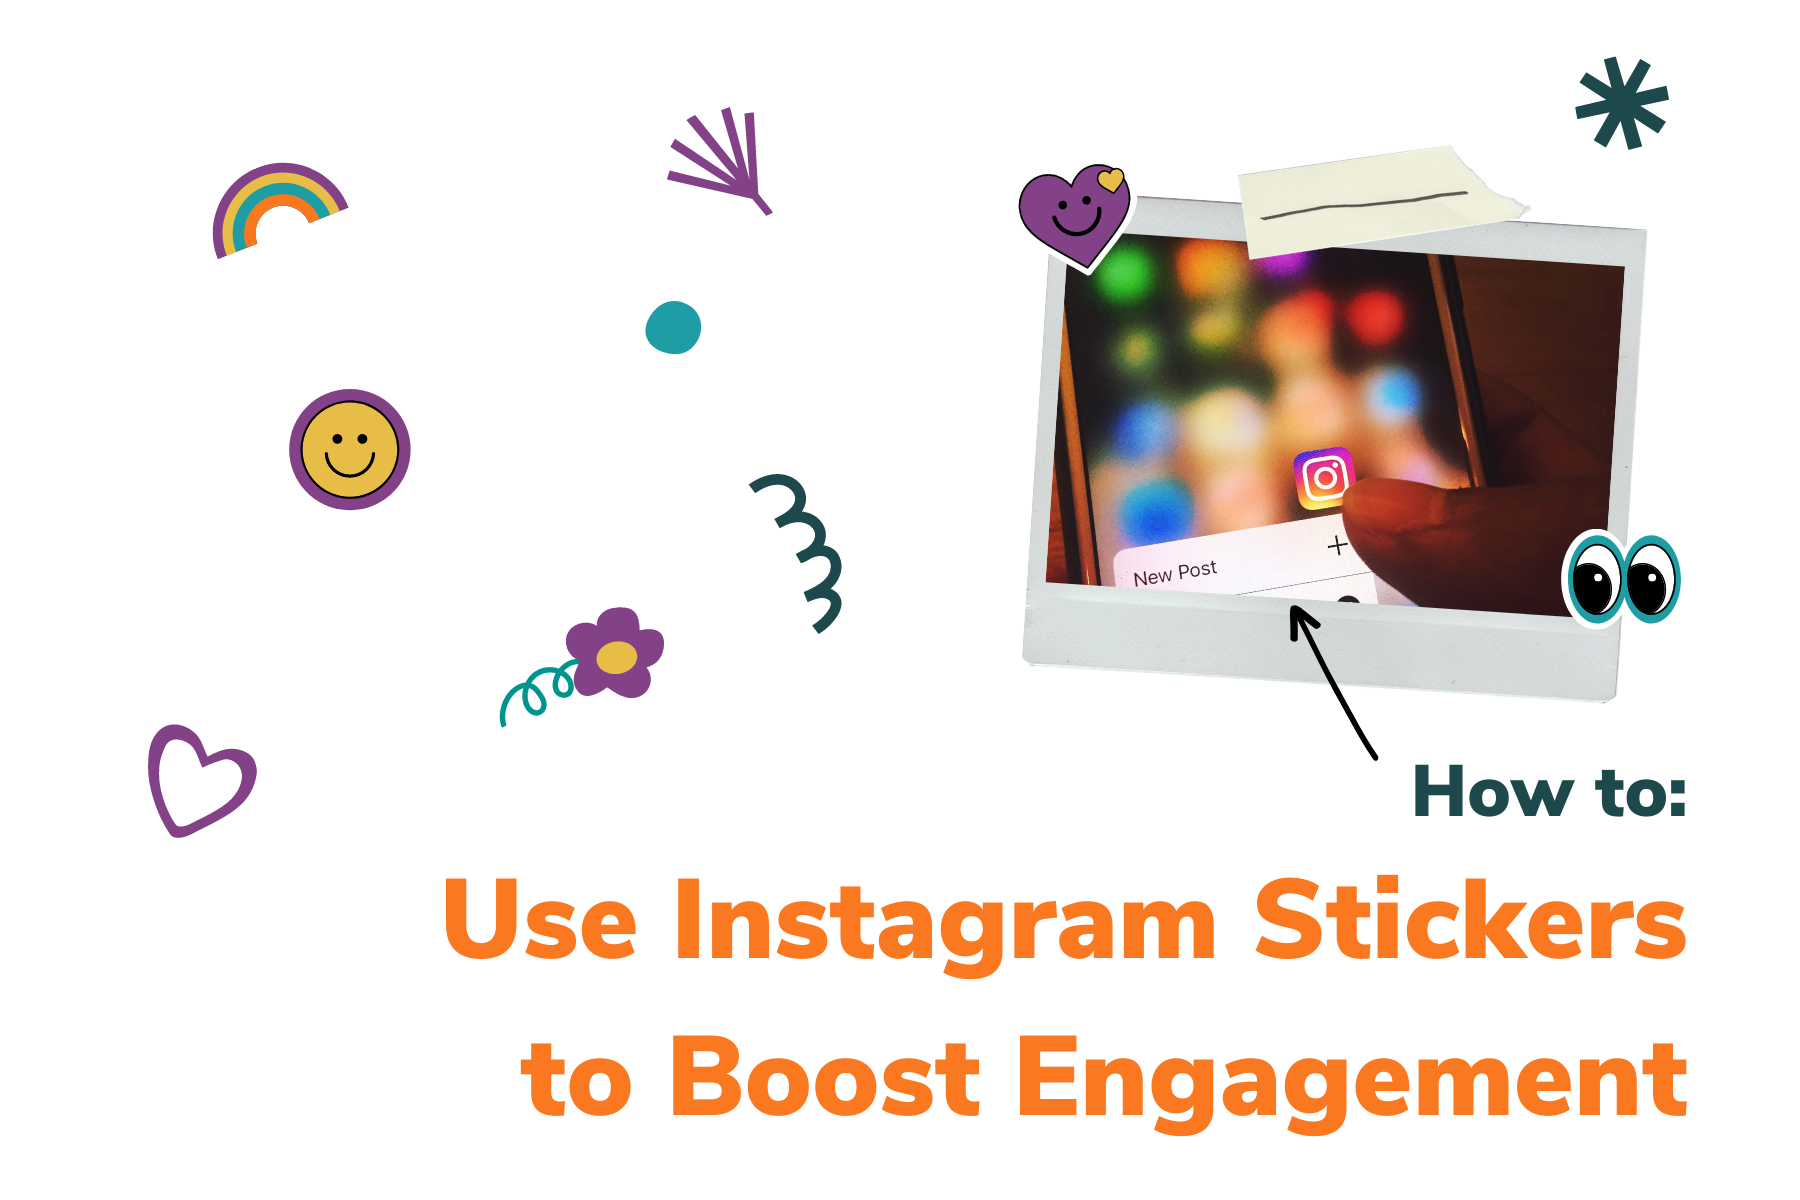 How to: Use Instagram Stickers to Boost Engagement